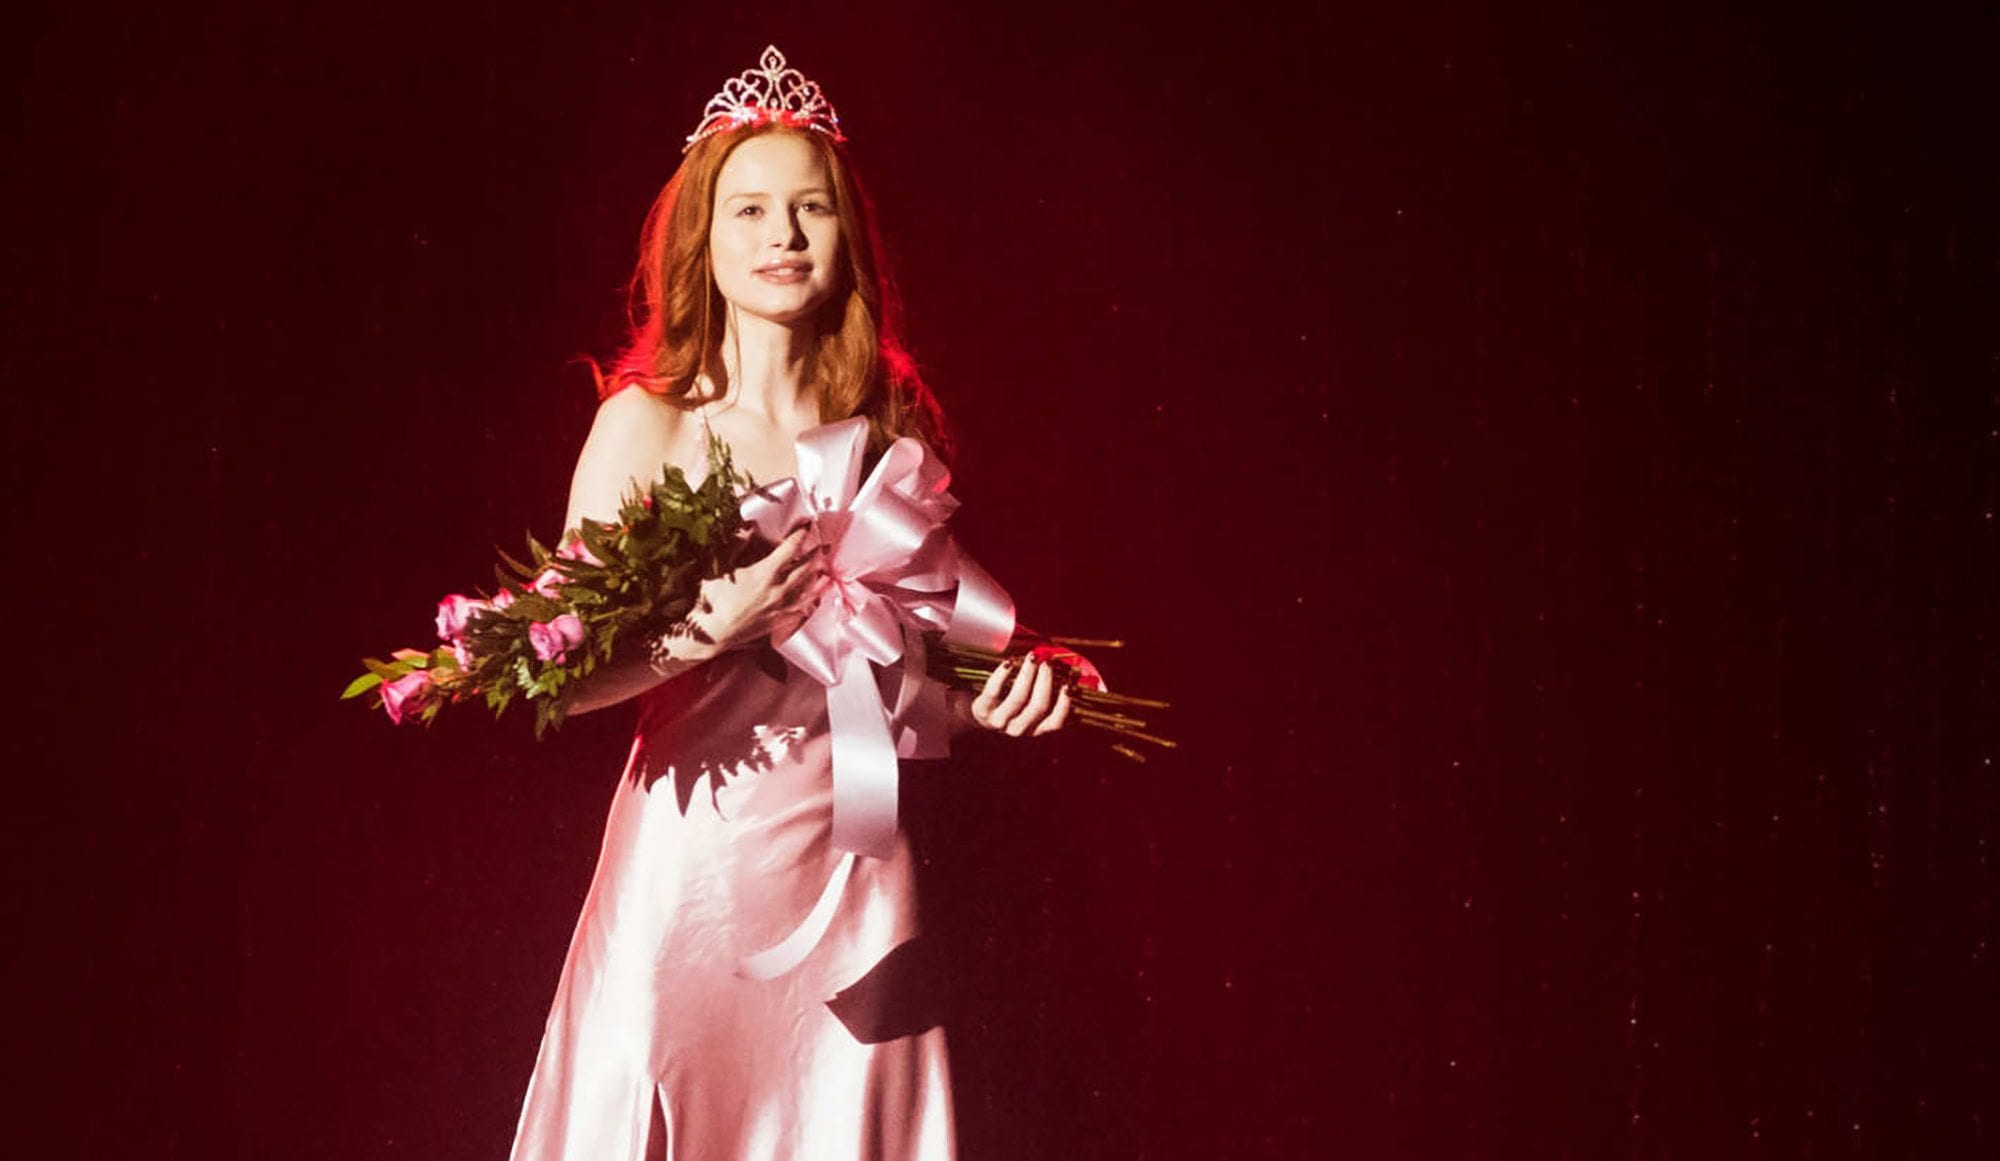 We were living for every second of the highly anticipated “Carrie: The Musical” episode of 'Riverdale' and have ranked its fiercest moments.